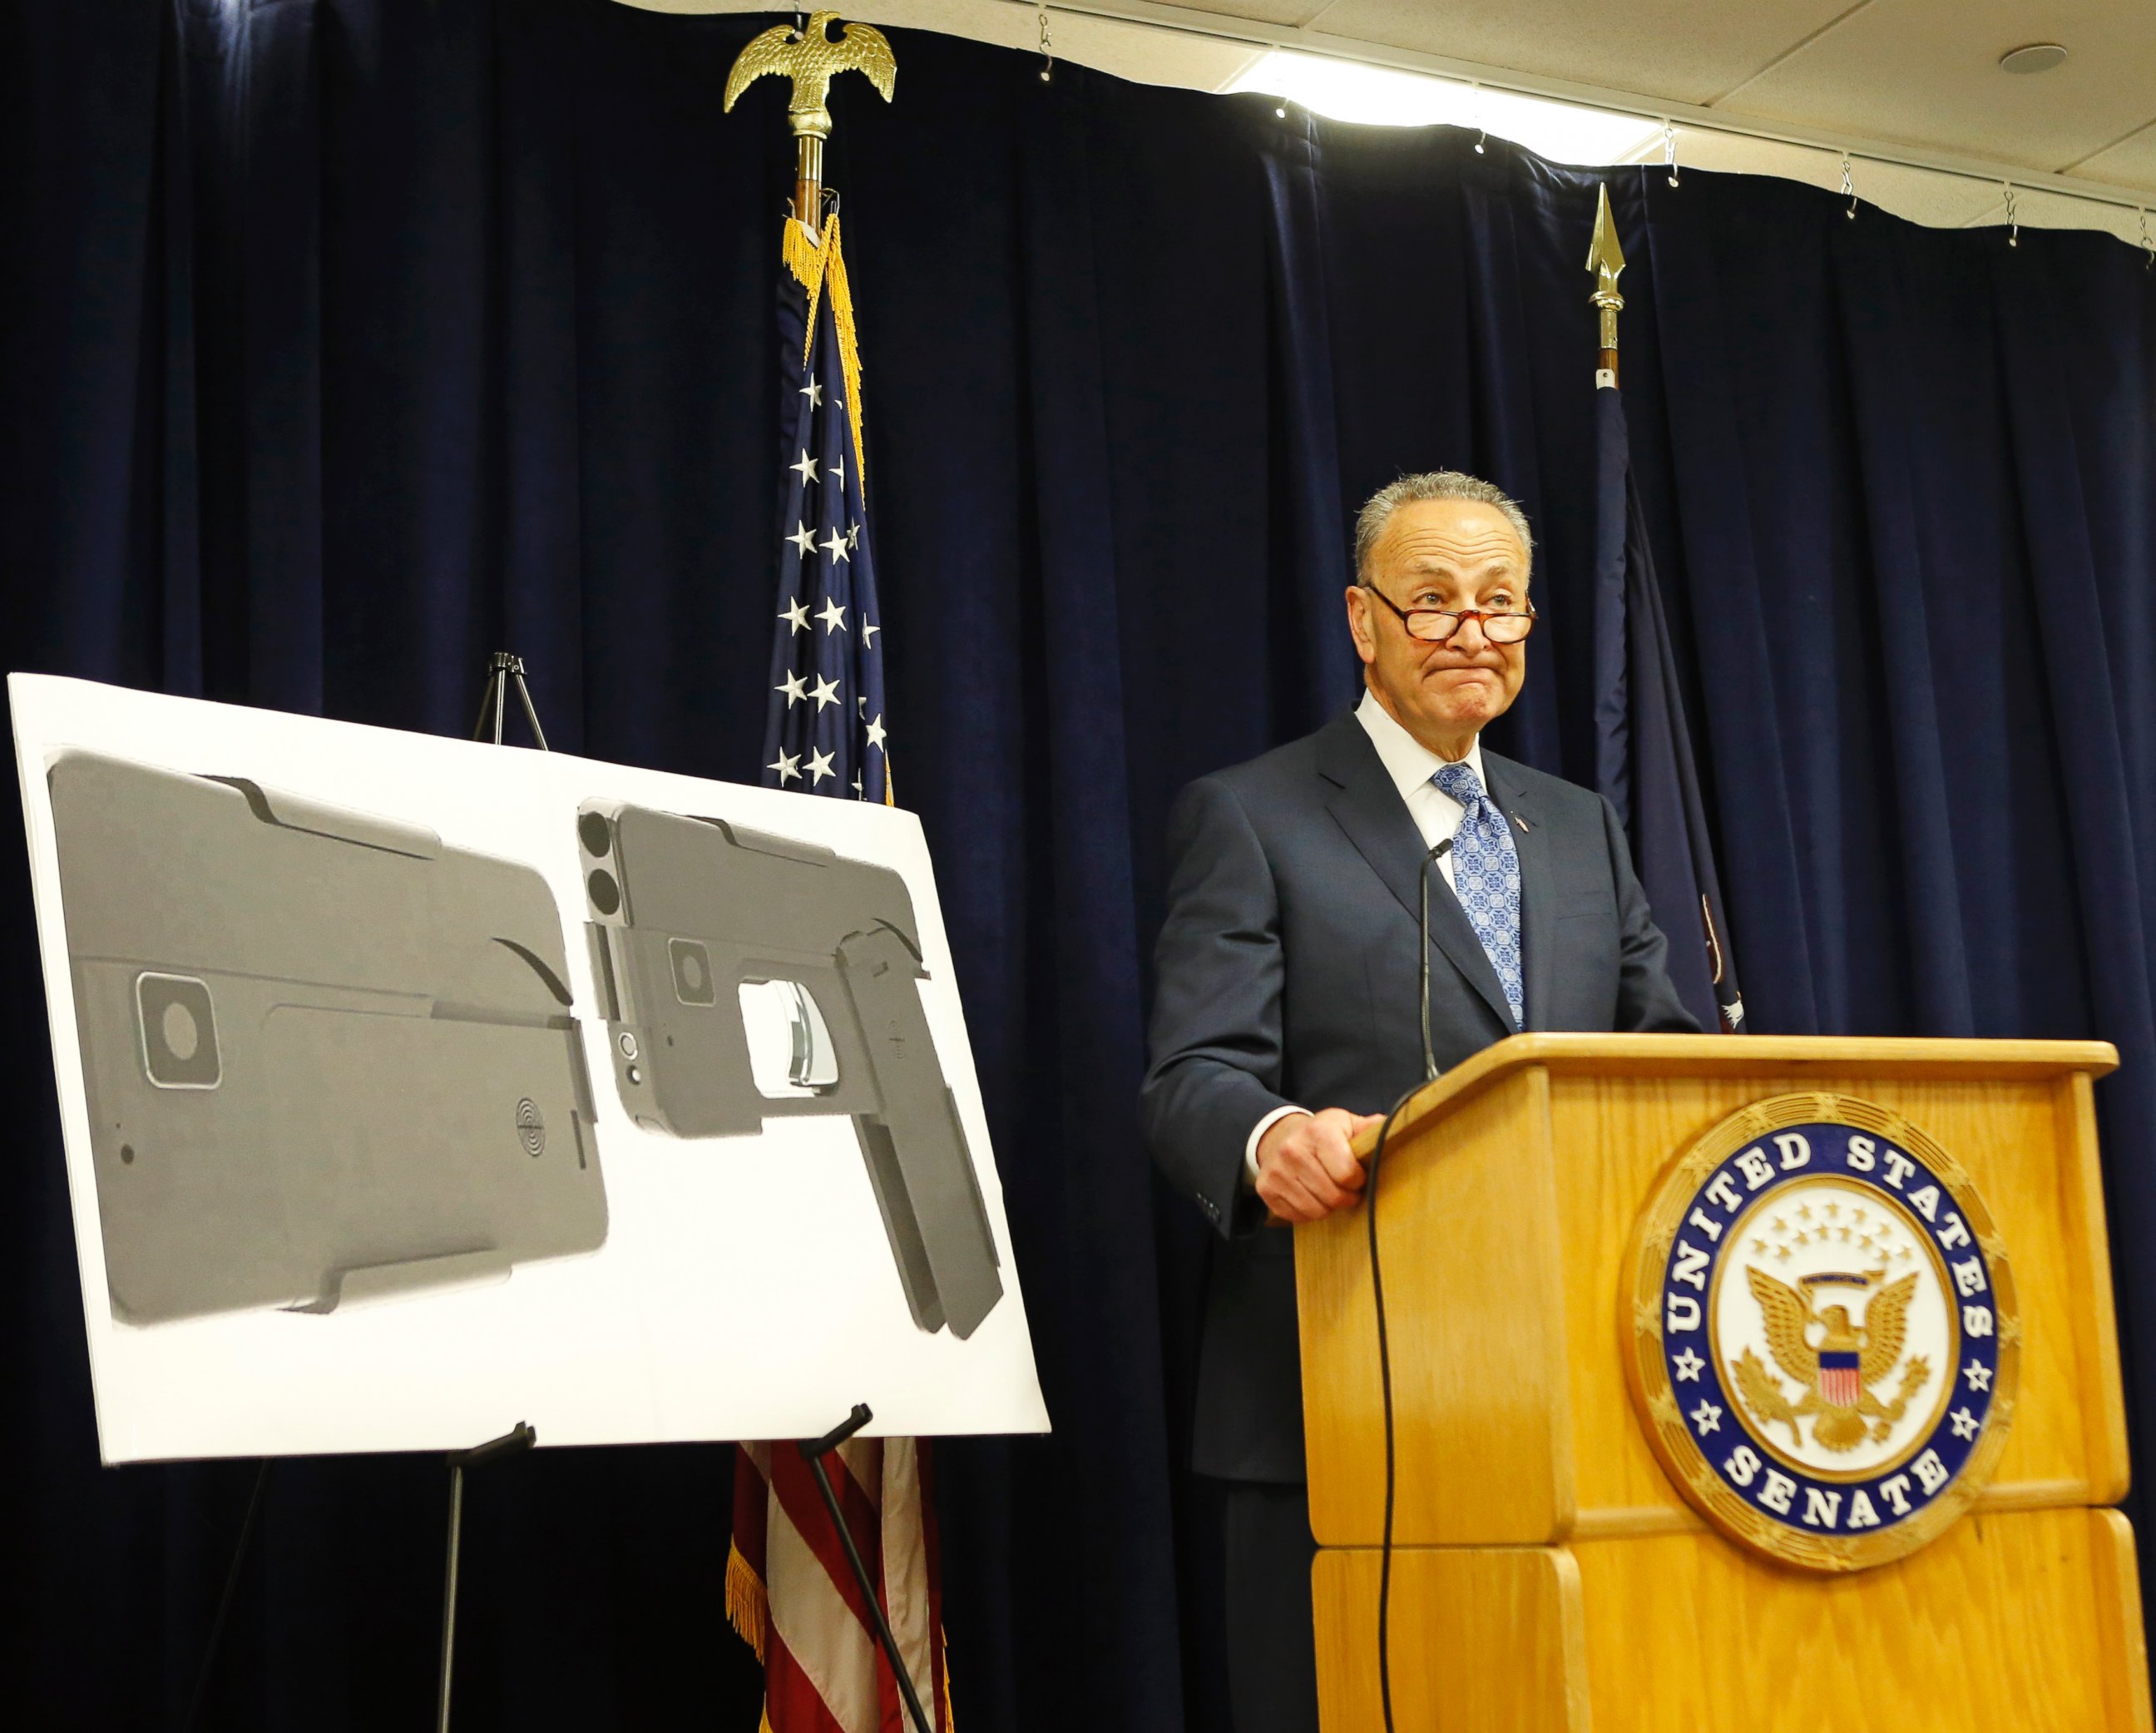 U.S. Sen Charles Schumer stands beside two photographs of what appears to be a cell phone, but is actually a handgun, during a press conference in his office,  April 4, 2016, in New York.  